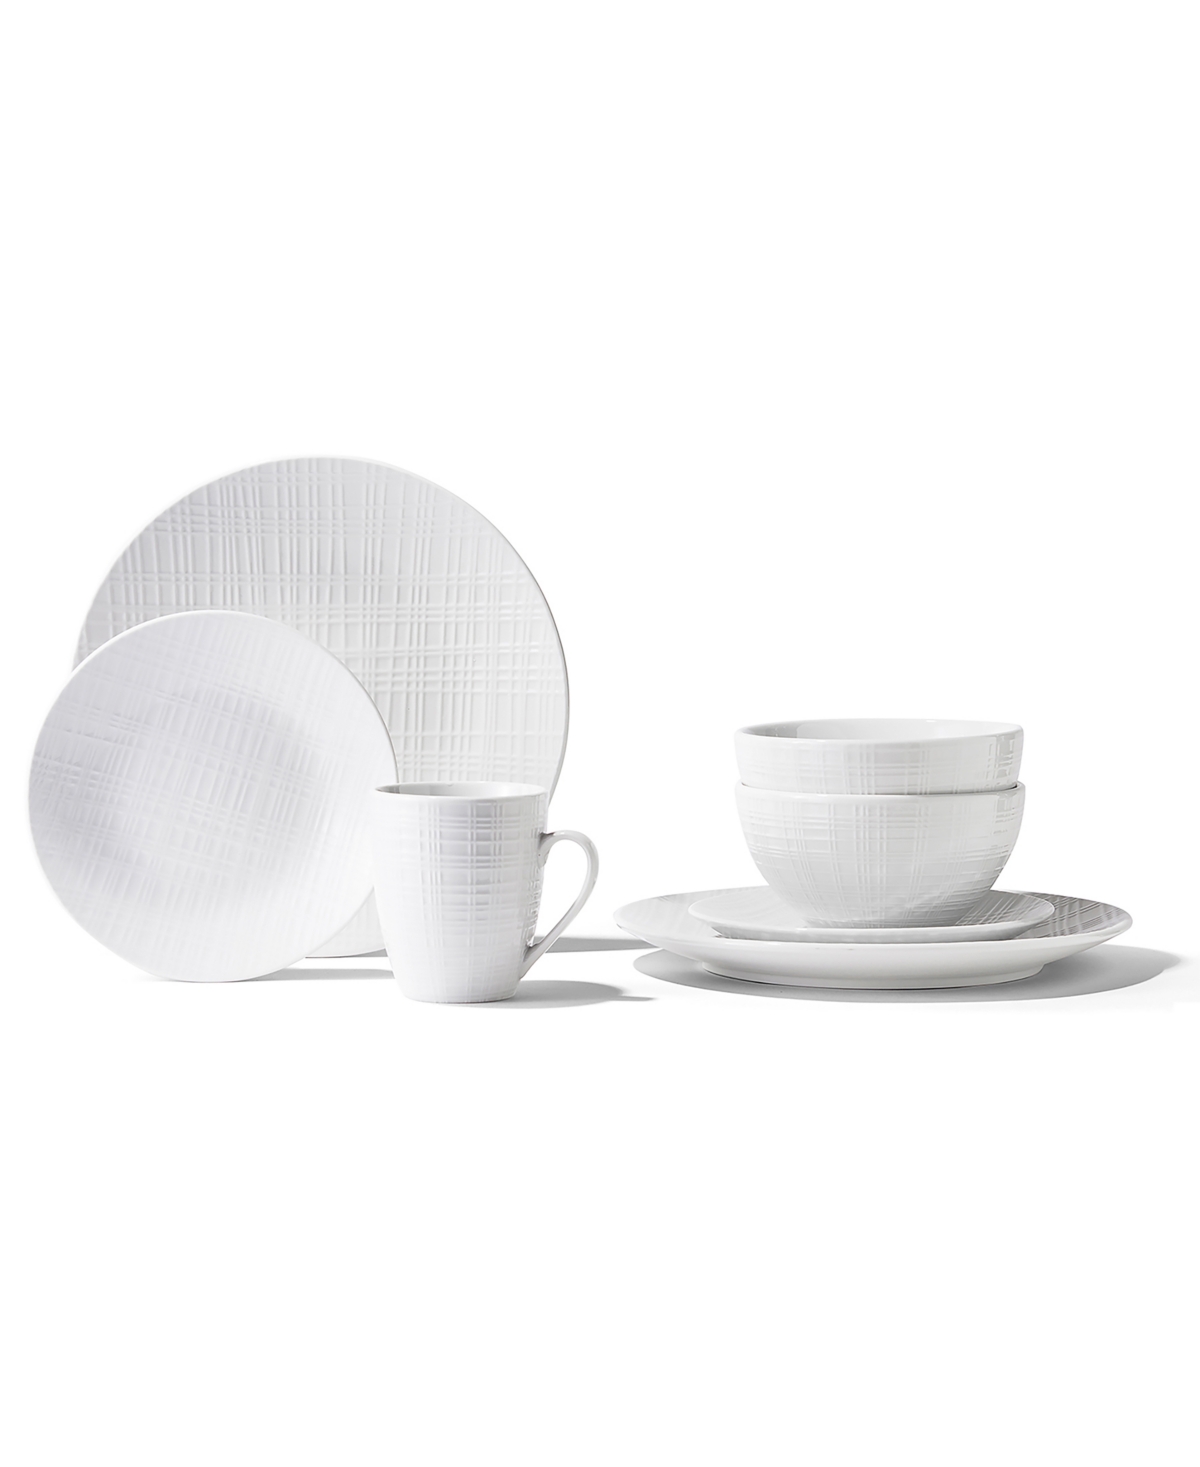 Jay Imports Maeve 16 Piece Dinner Set In White